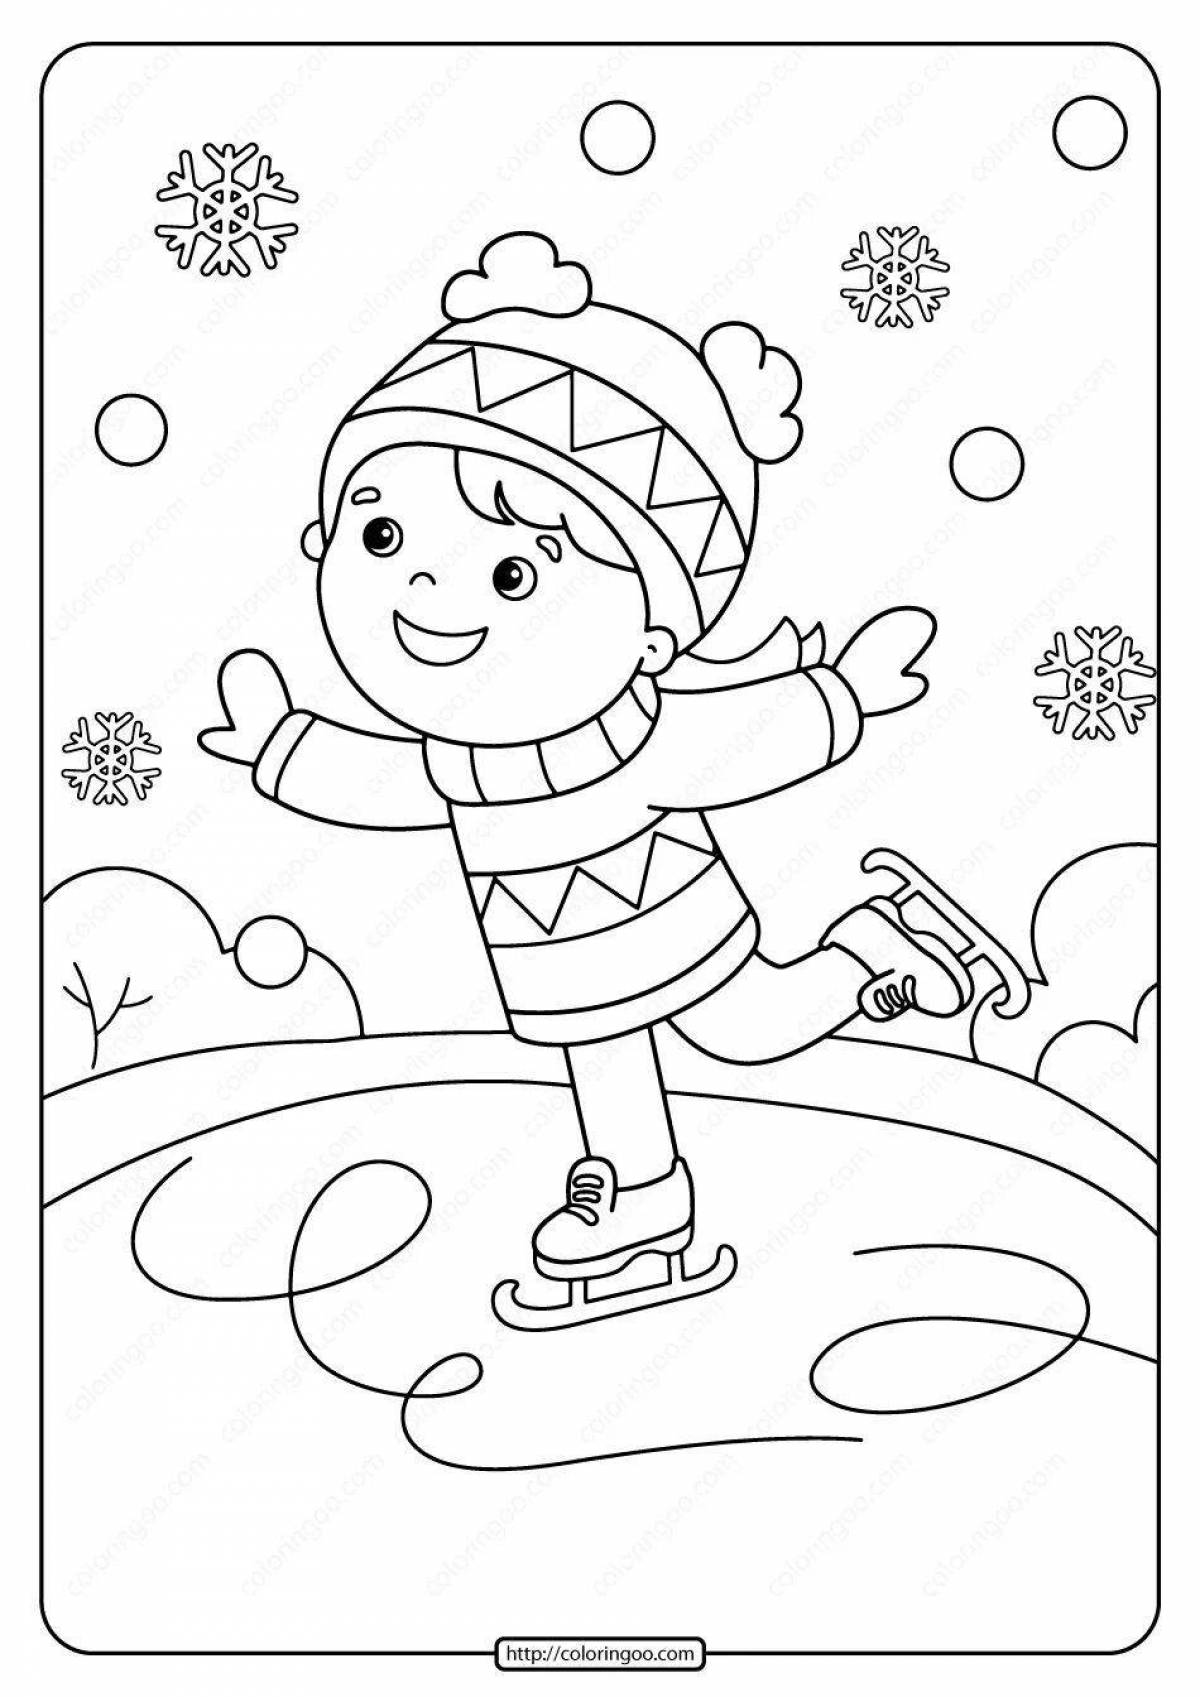 Great coloring book for kids winter sports